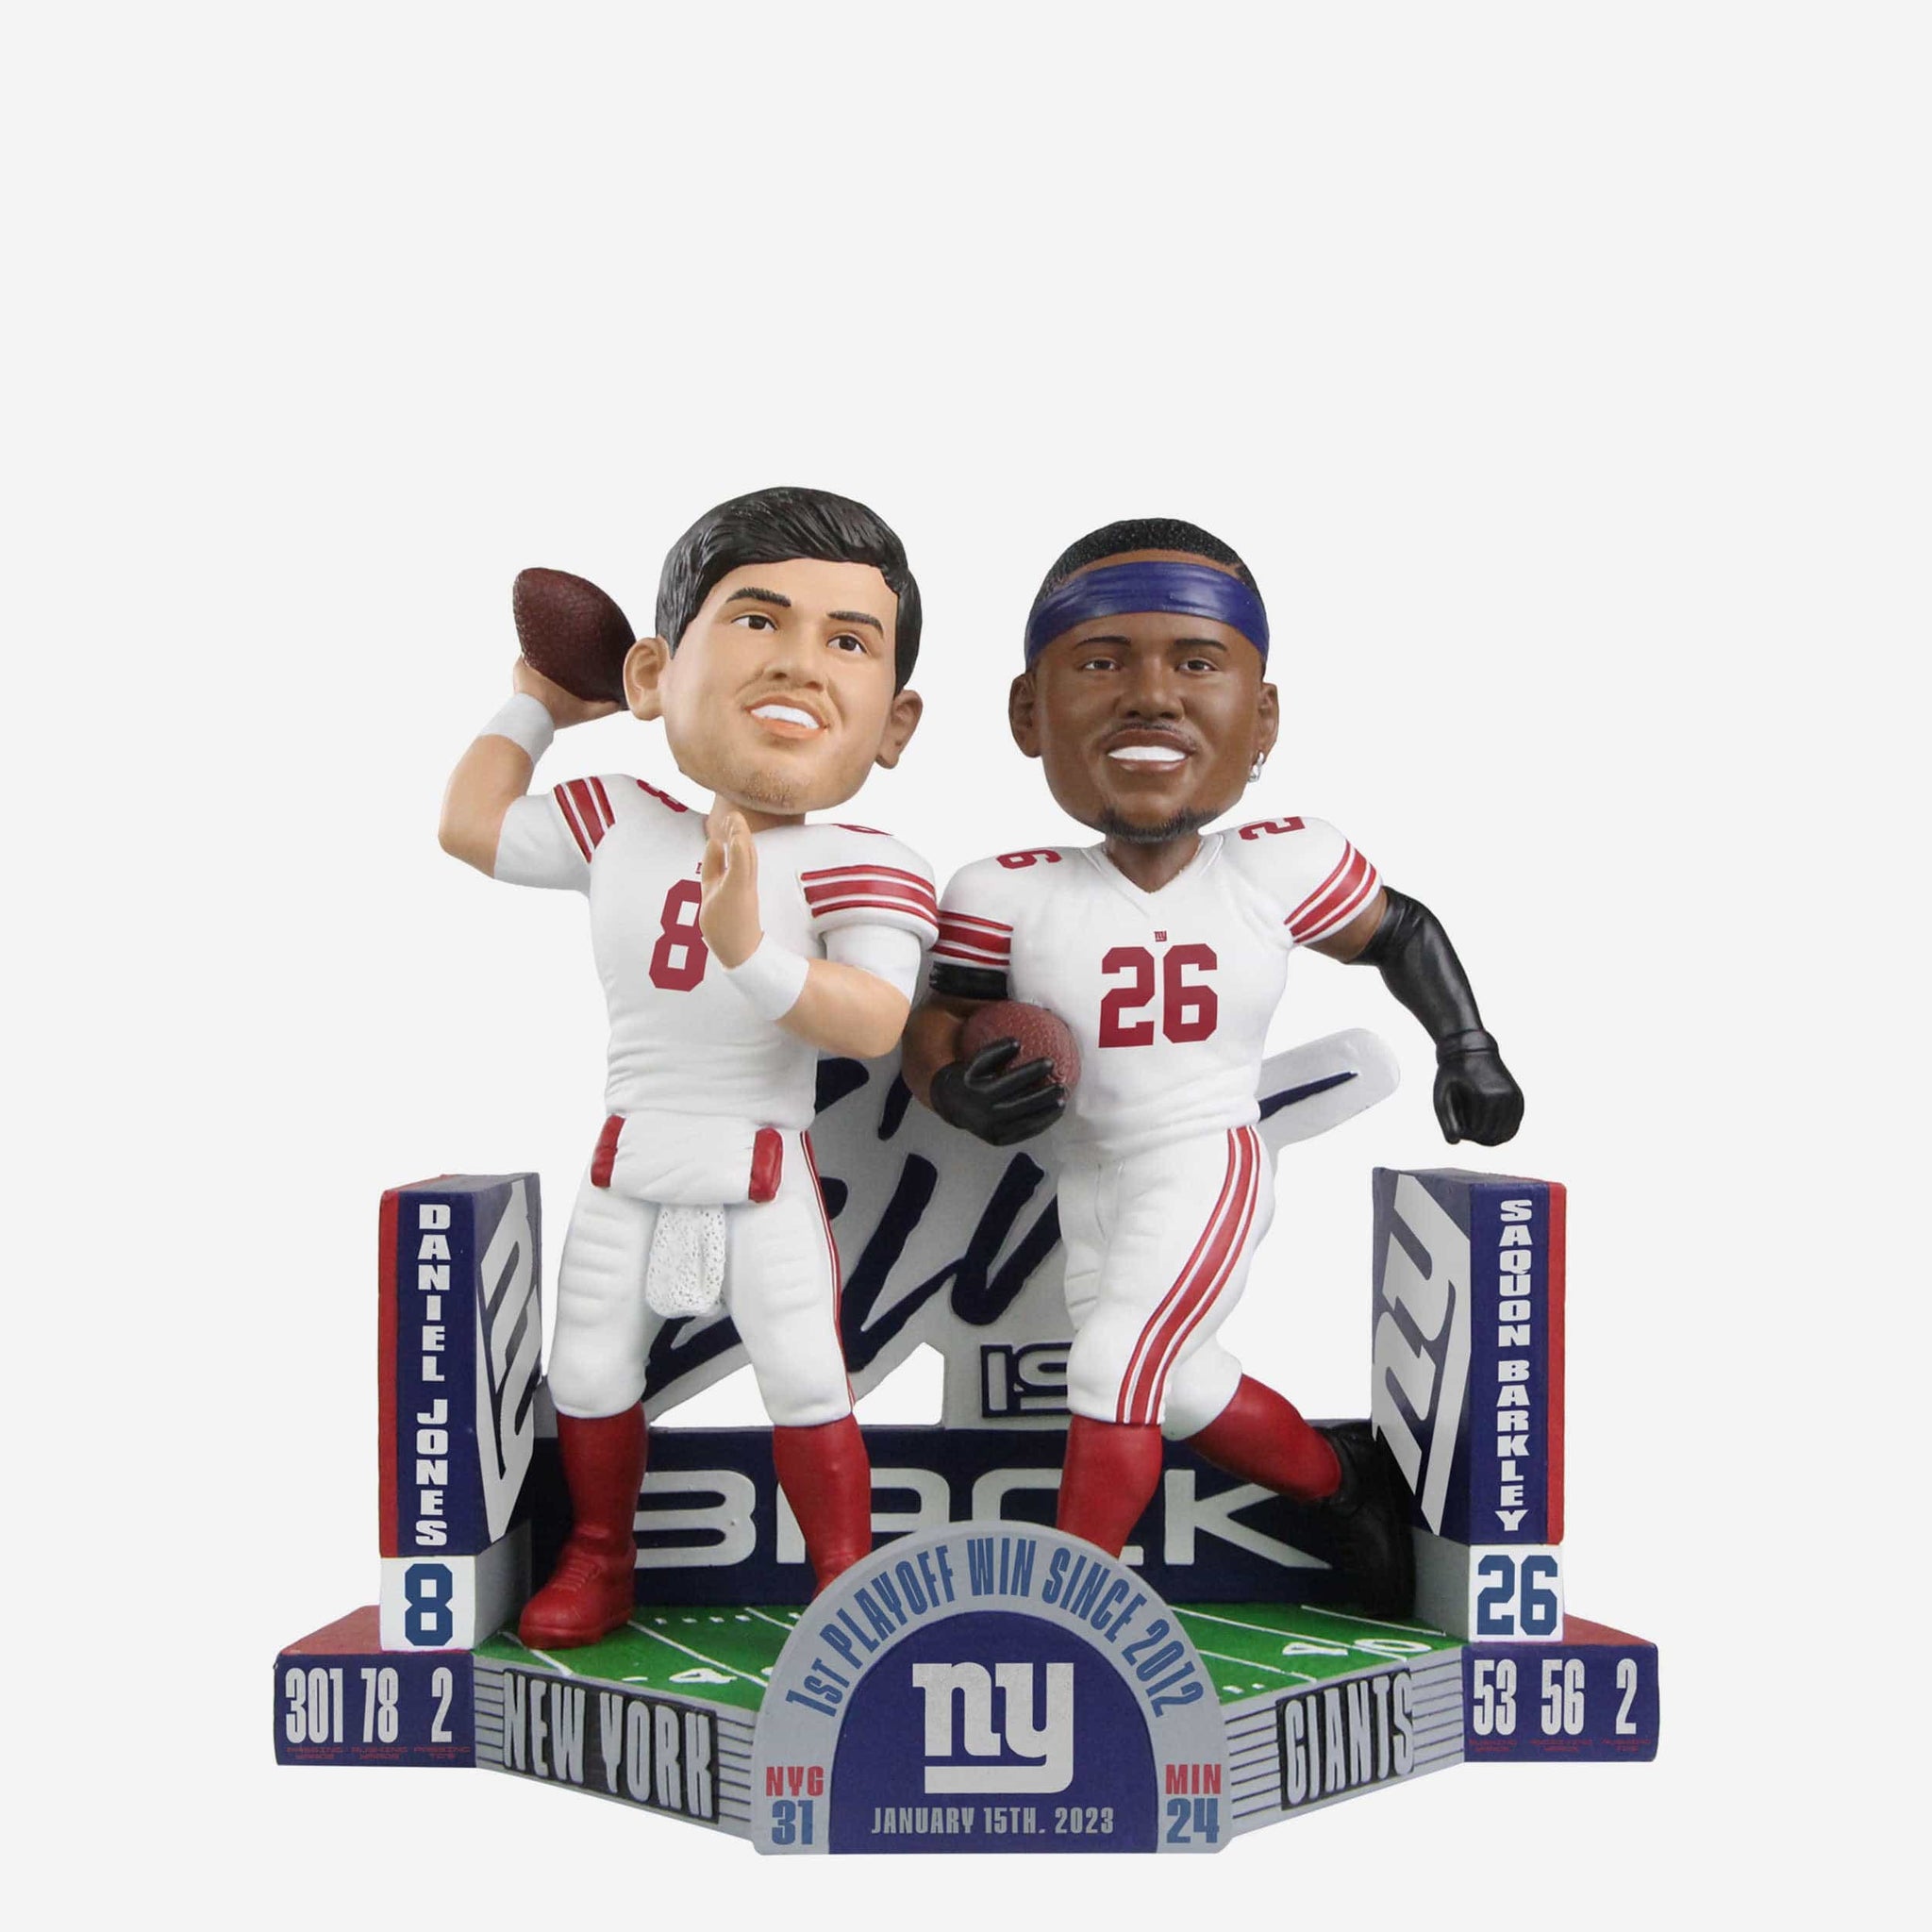 New York Giants Apparel, Collectibles, and Fan Gear. FOCO